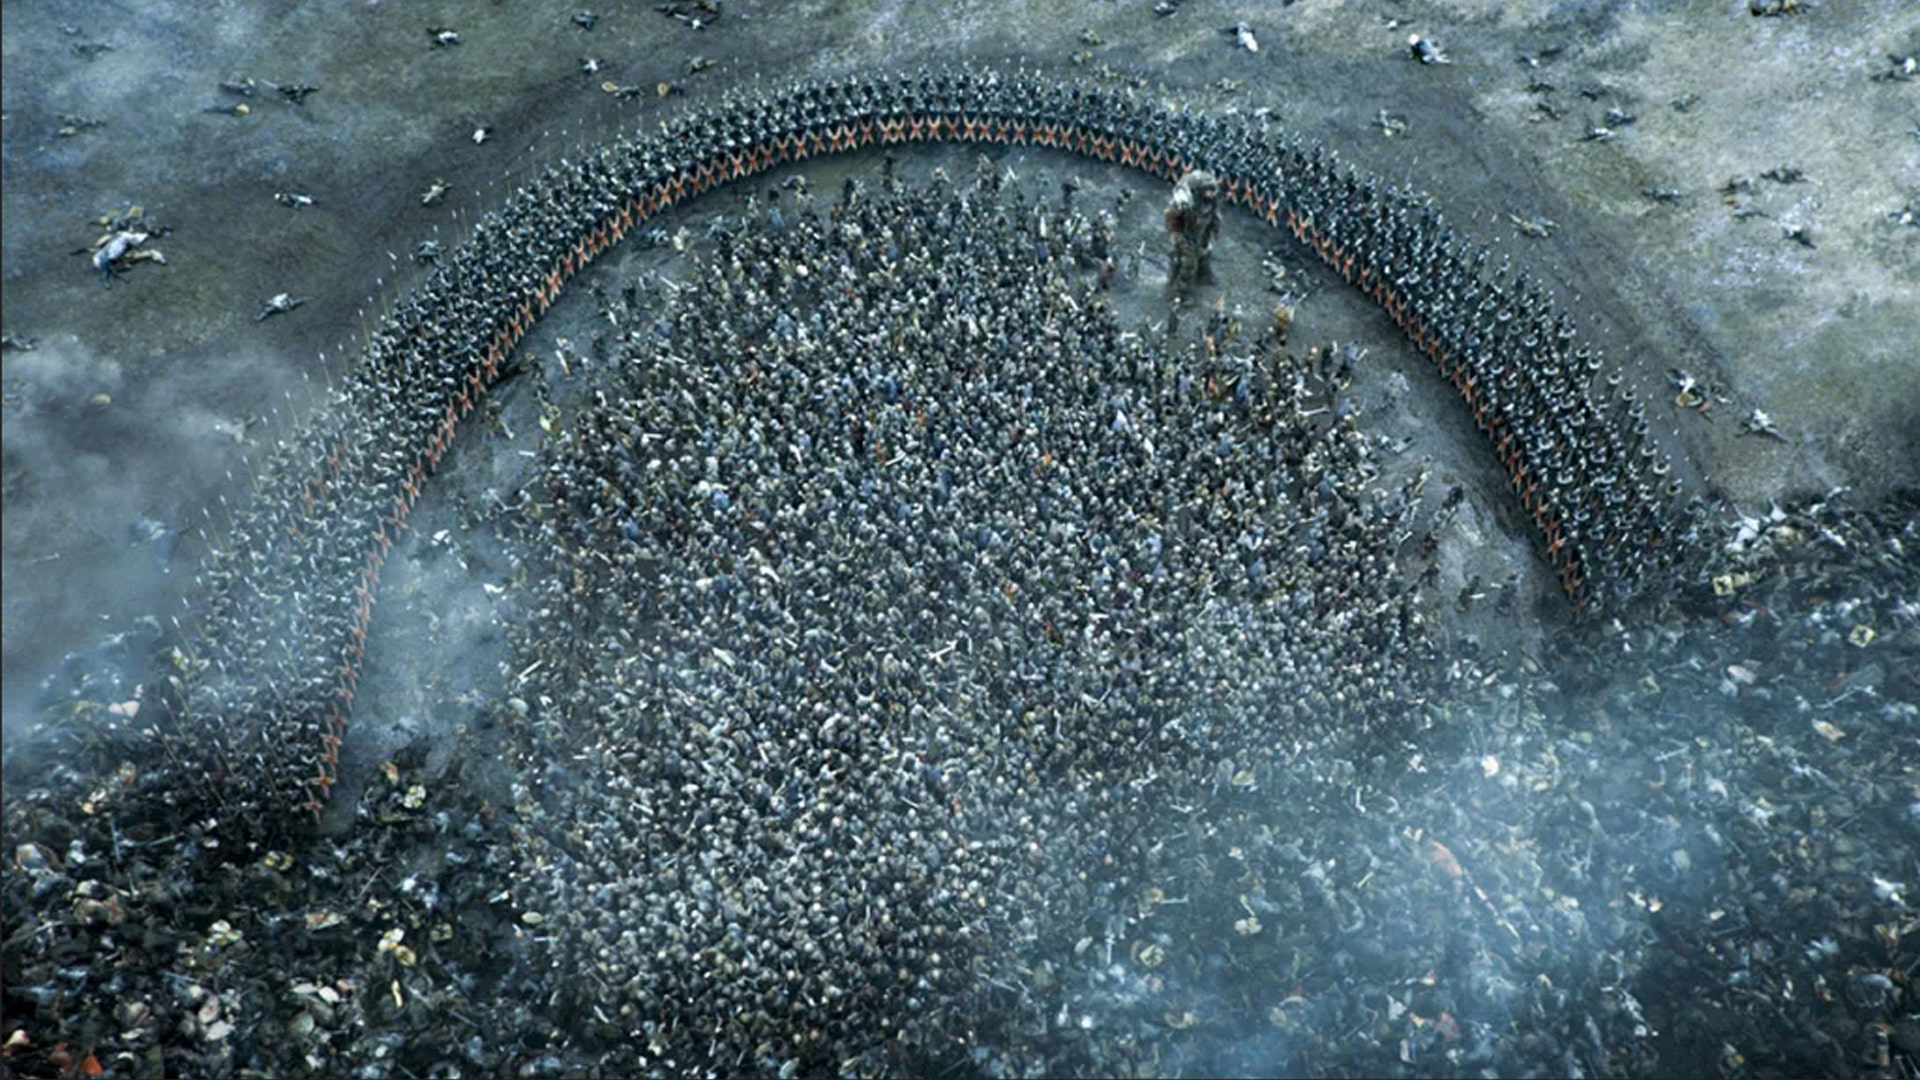 Artwork from Game of Thrones titled 'Rise of the Phalanx'